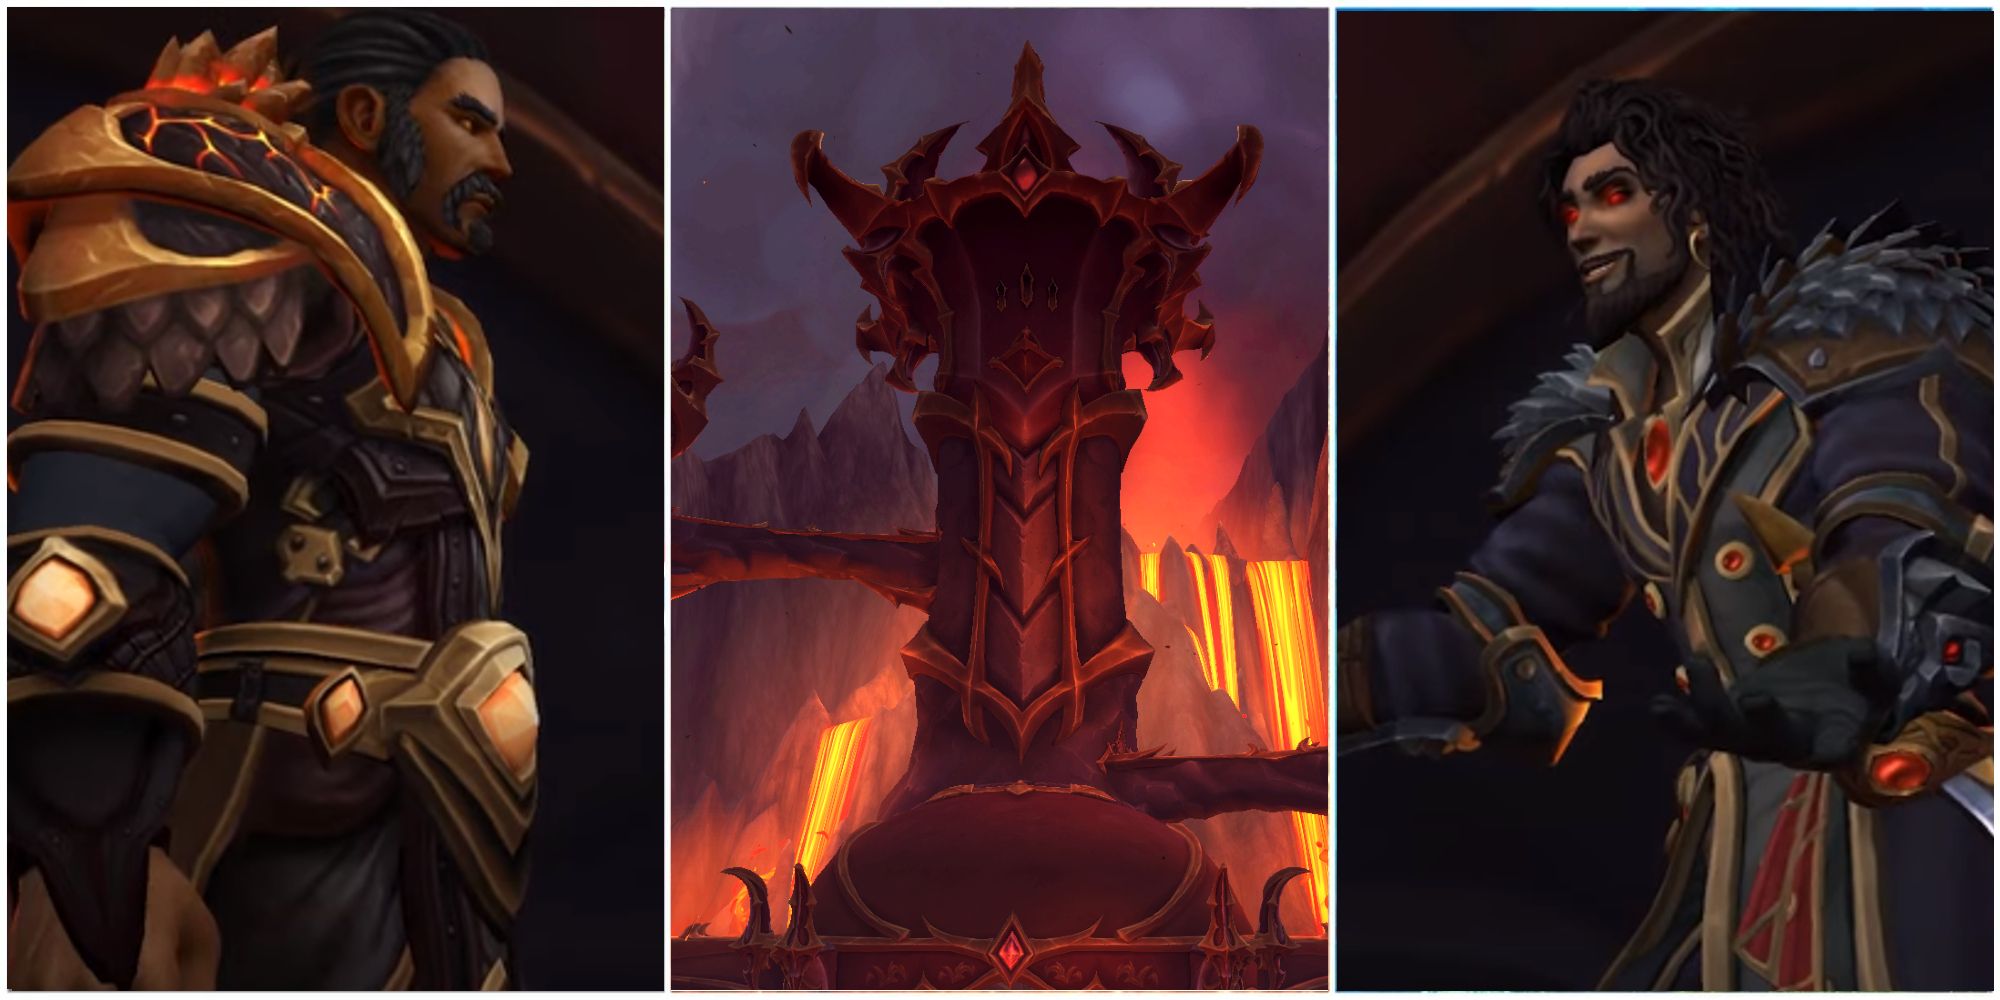 Wrathion, Sabellian and Dragonbane Keep as seen in World of Warcraft Dragonflight